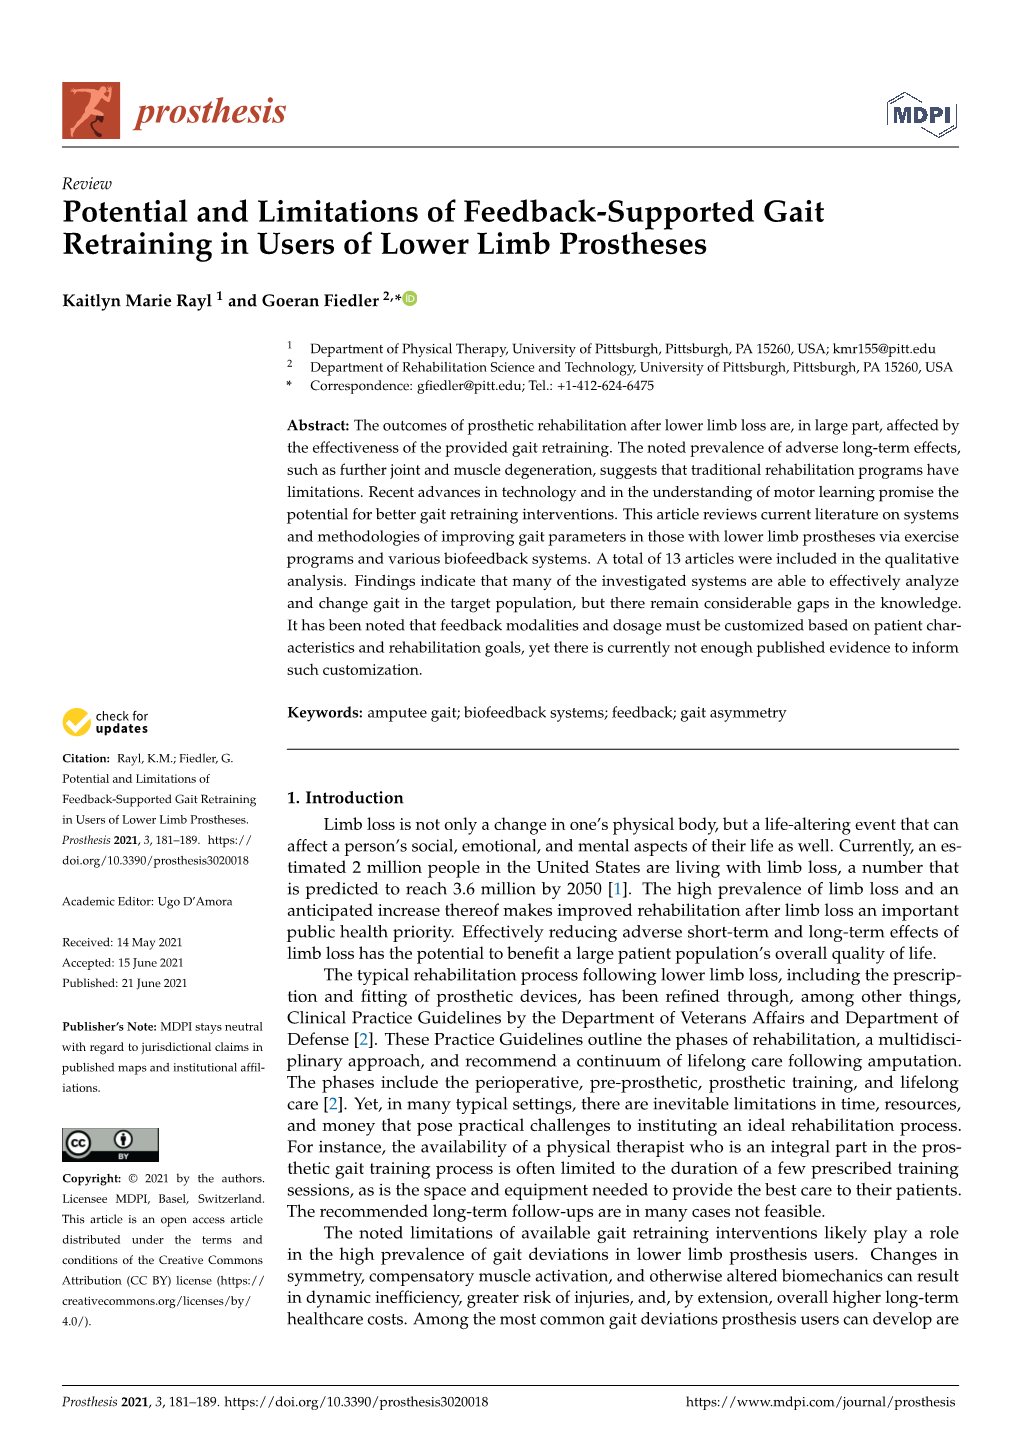 Potential and Limitations of Feedback-Supported Gait Retraining in Users of Lower Limb Prostheses